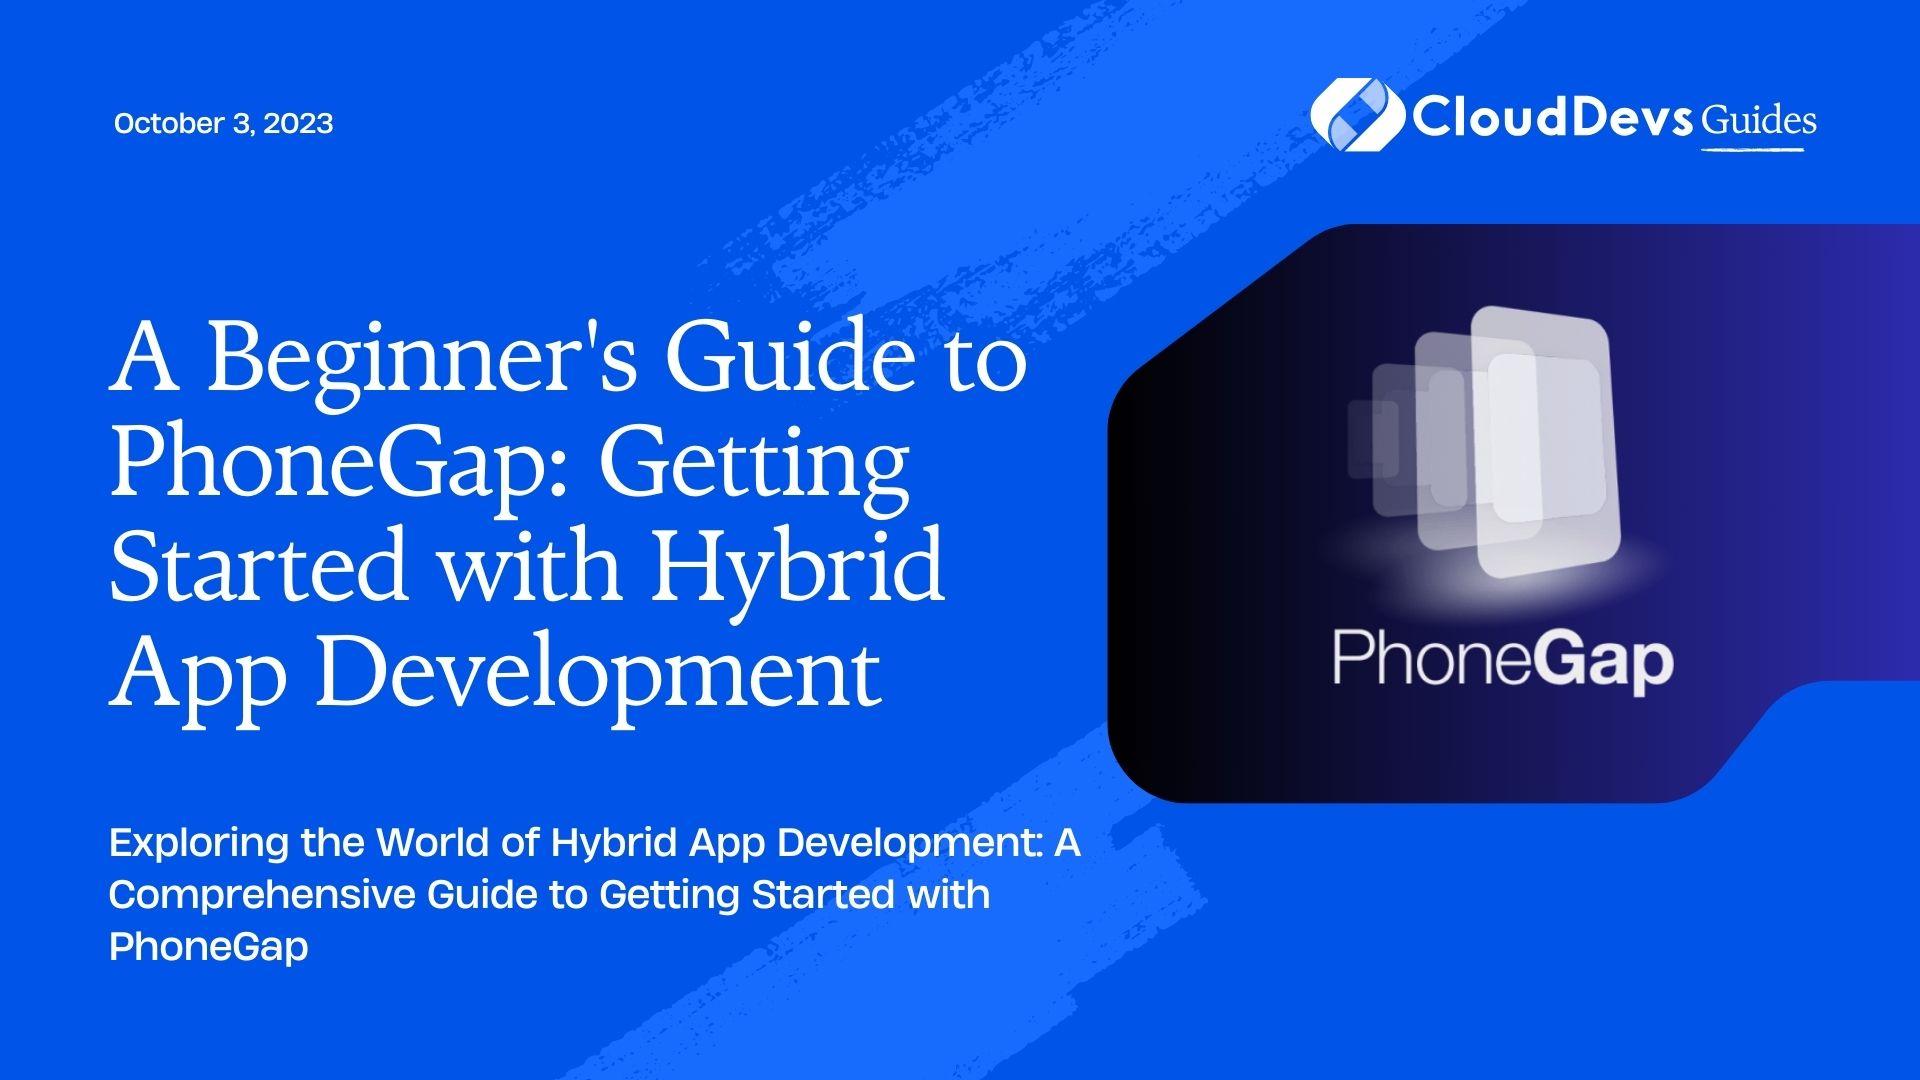 A Beginner's Guide to PhoneGap: Getting Started with Hybrid App Development